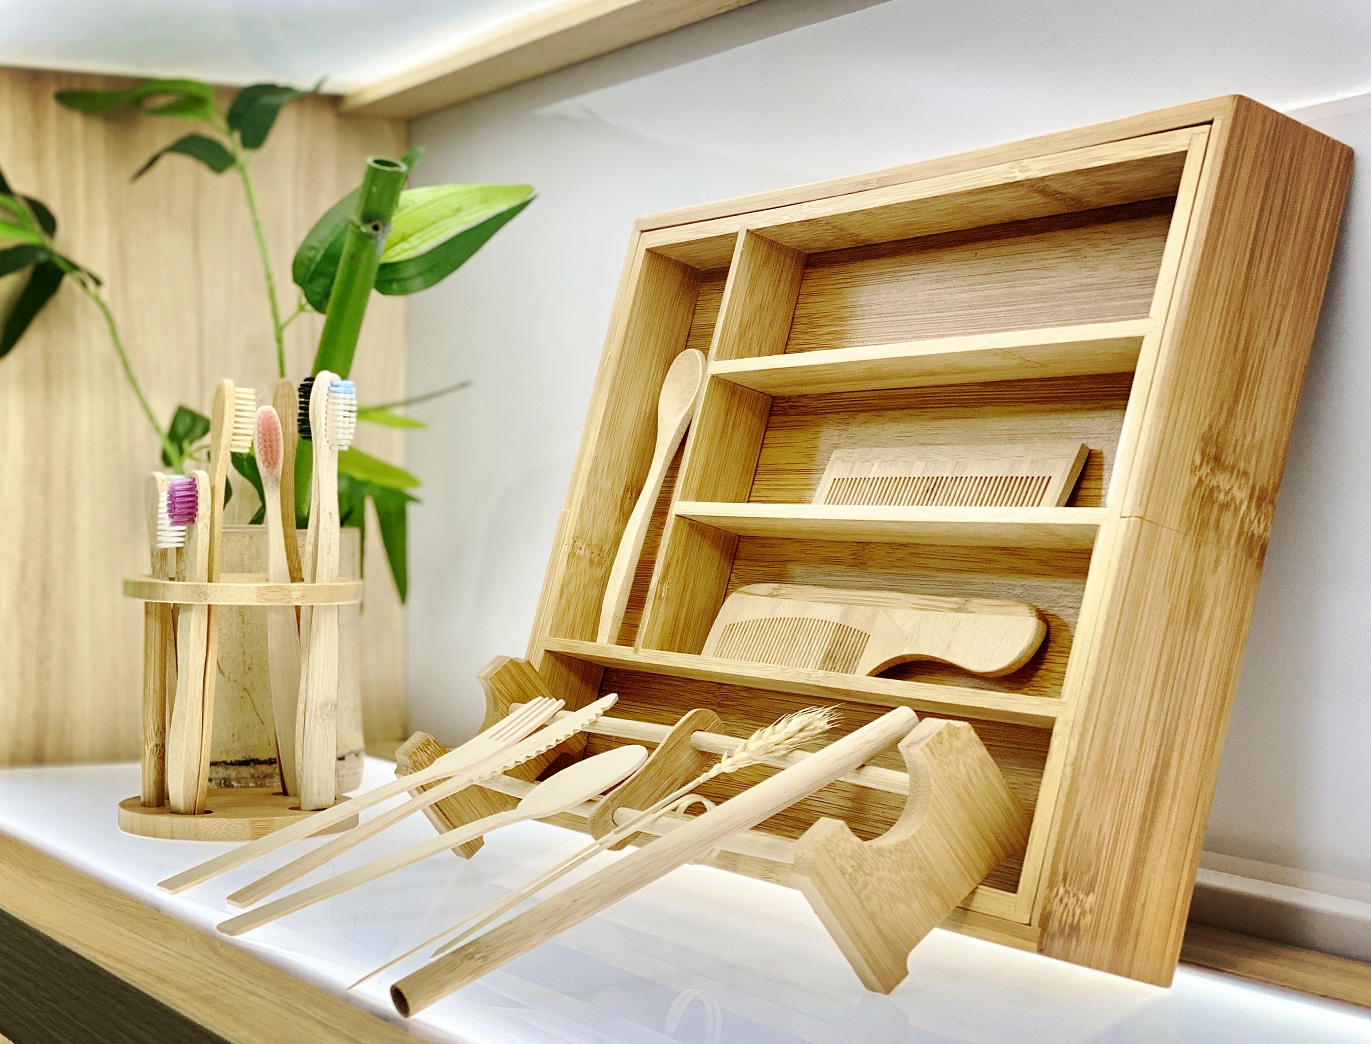 Bamboo product showing